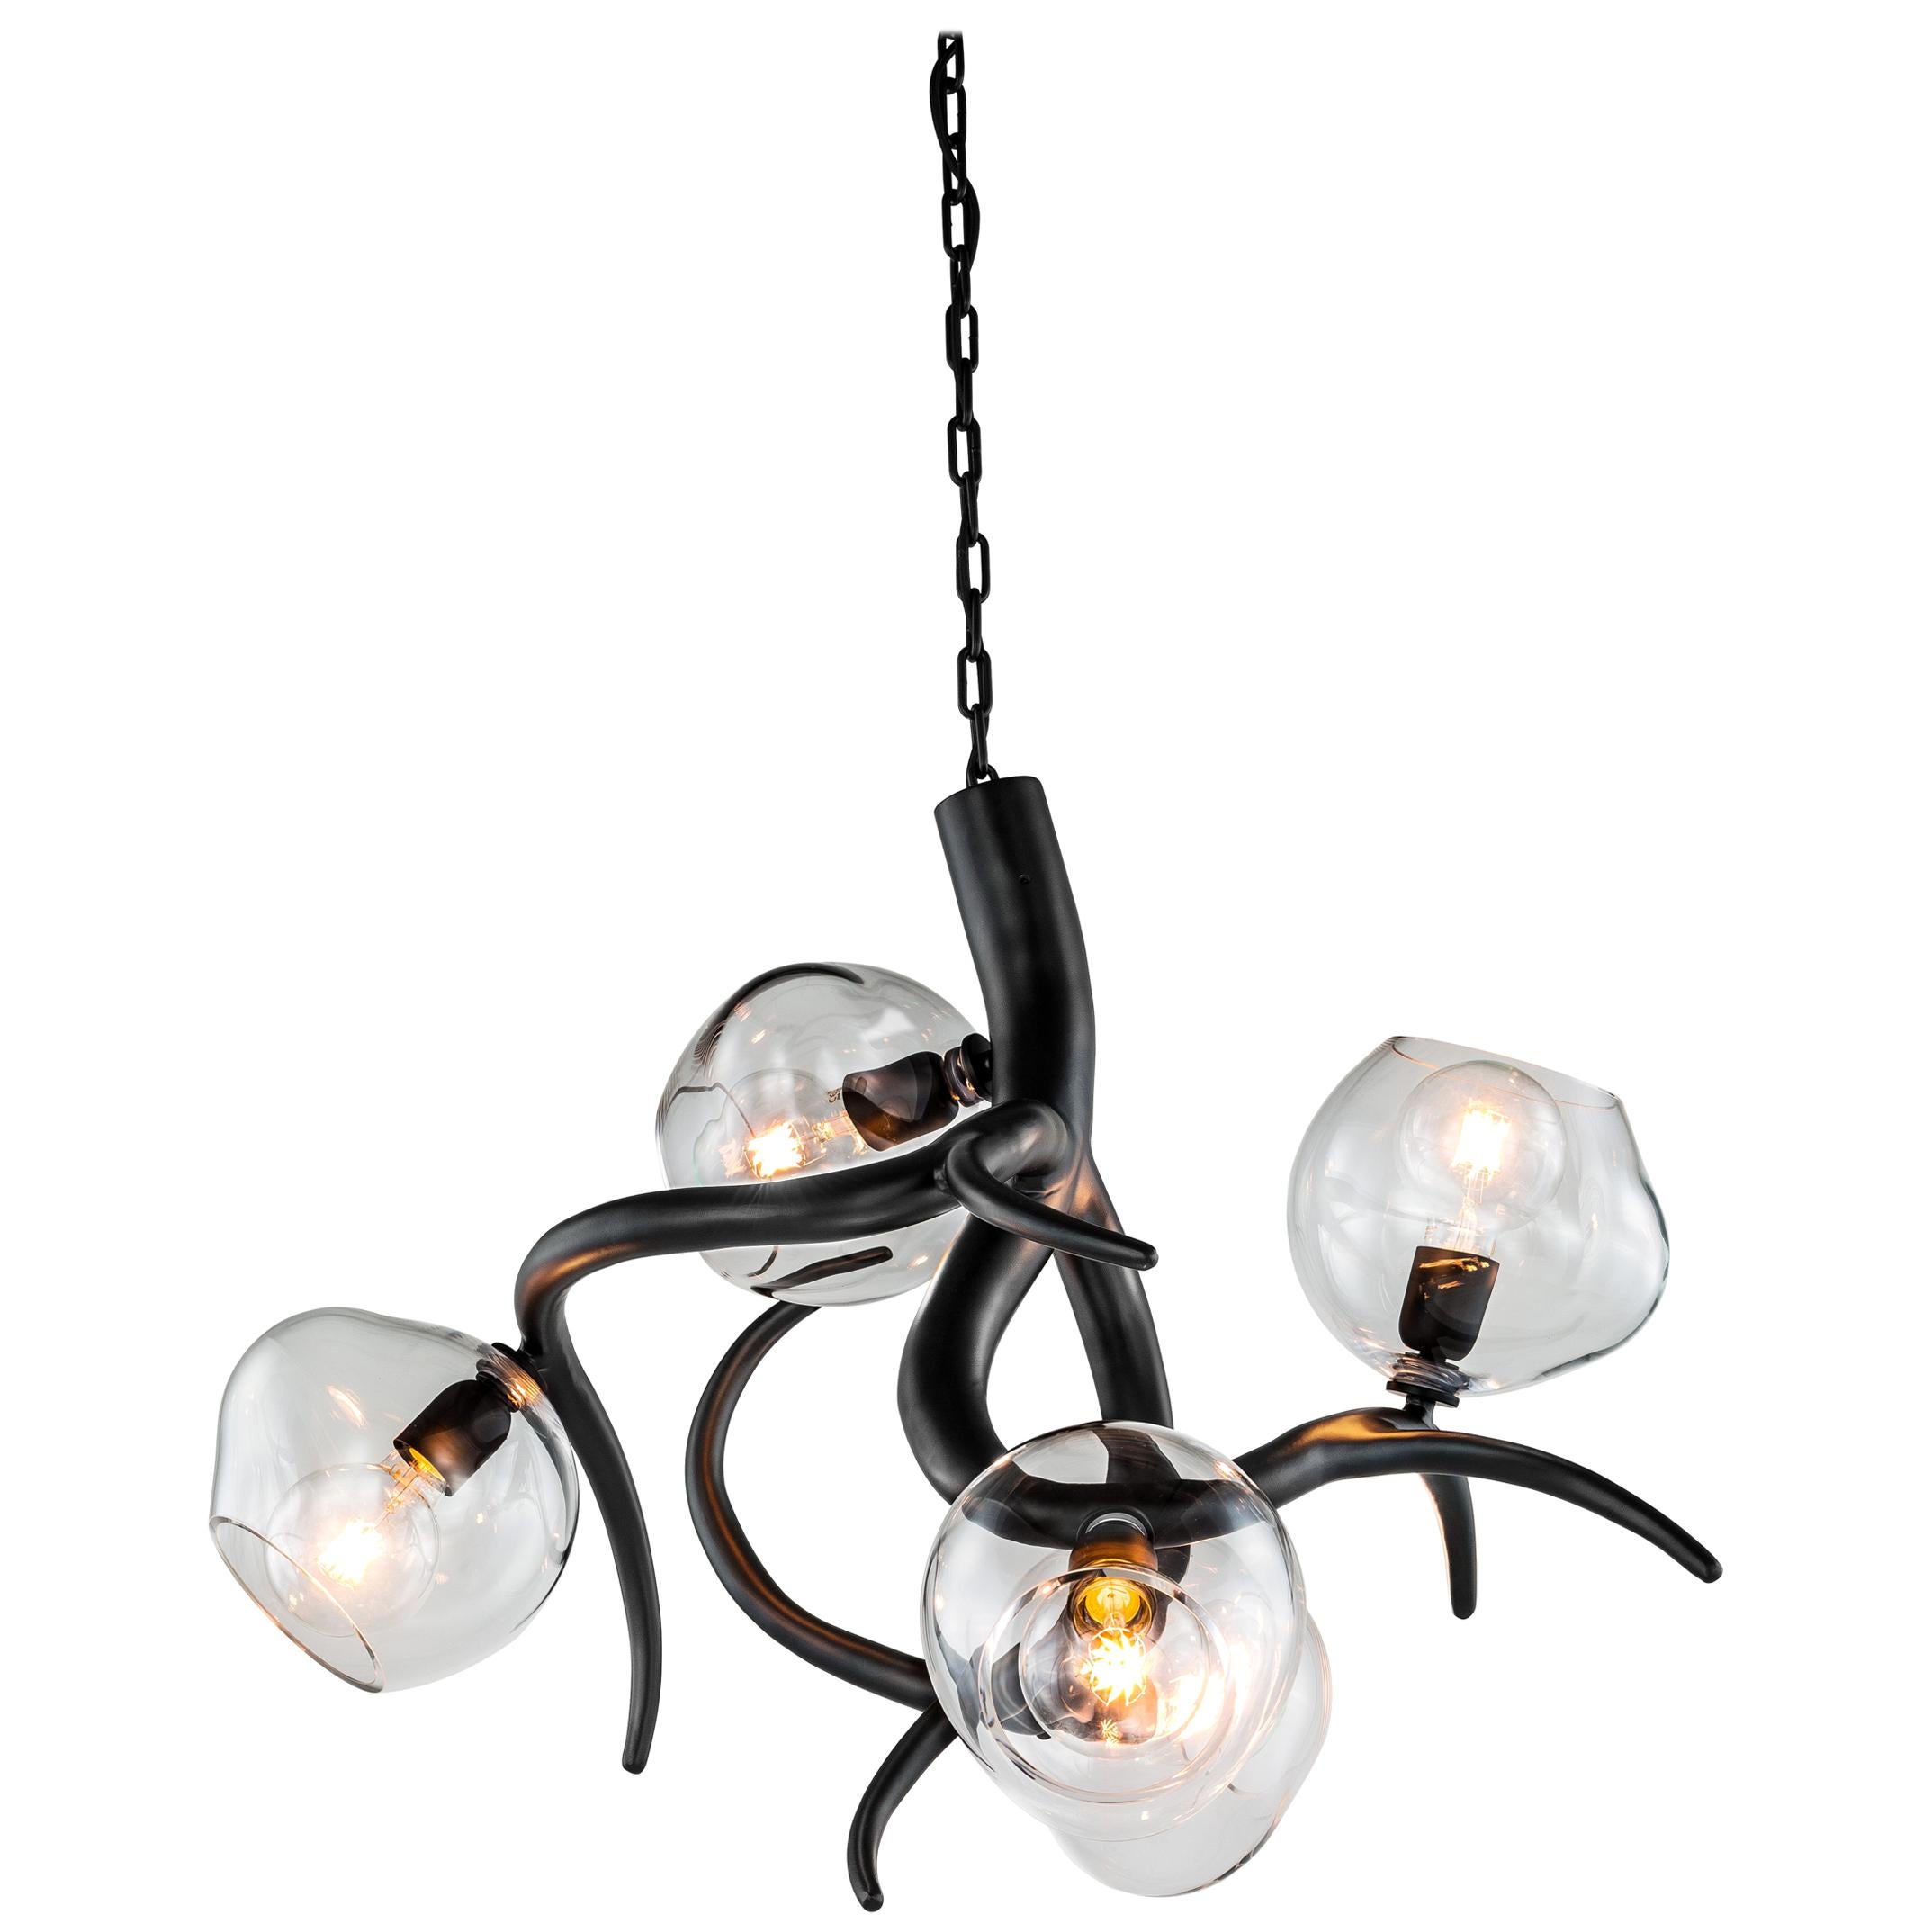 Modern Chandelier with Colored Glass in a Black Matt Finish, Ersa Collection For Sale